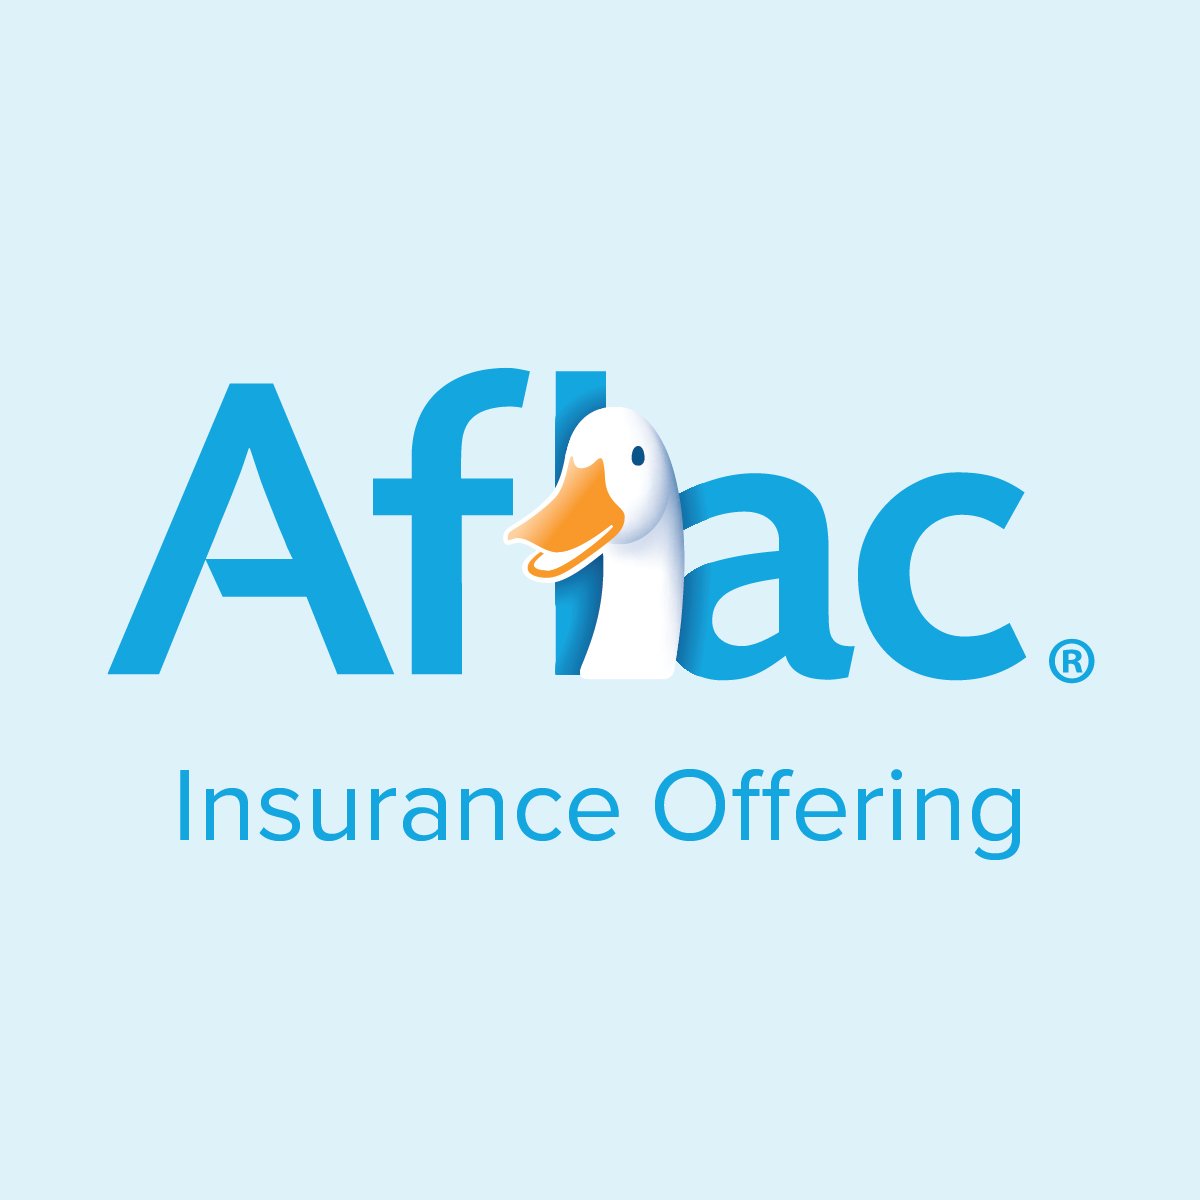 Aflac Insurance Offering